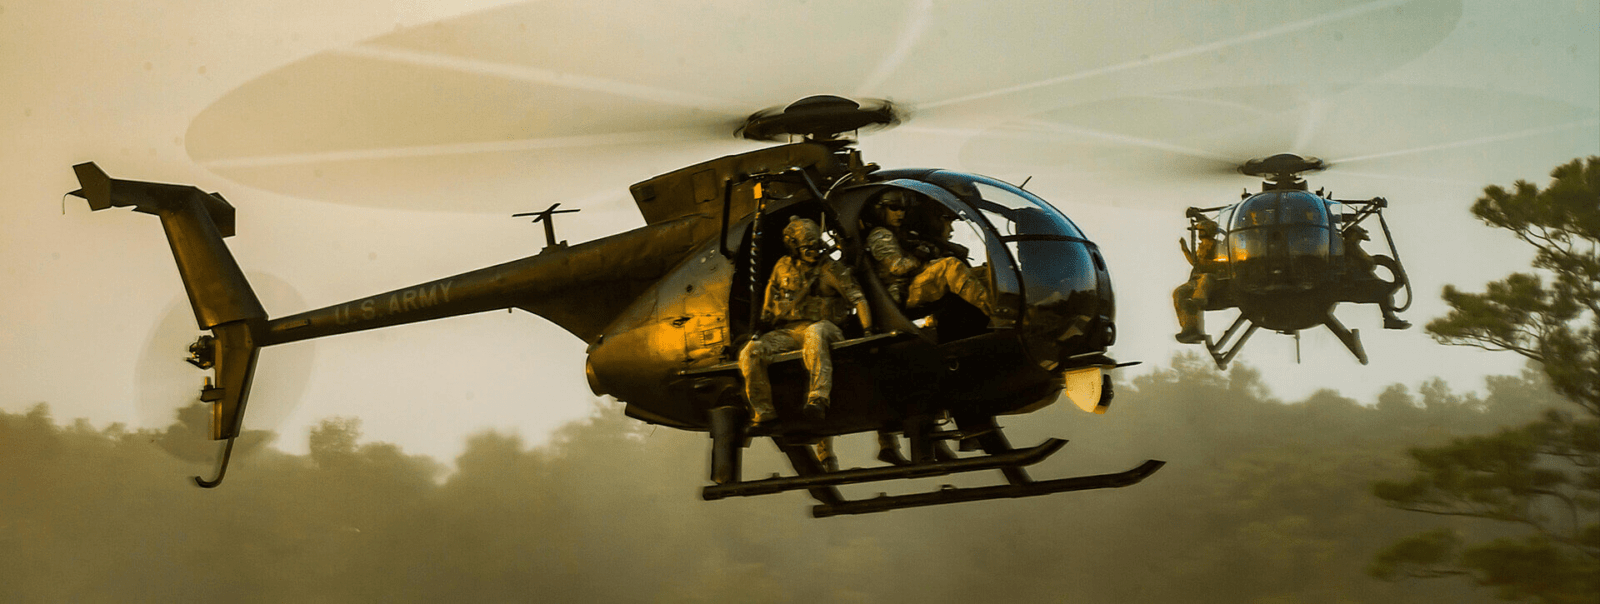 mh-6 Little Bird Special Operations